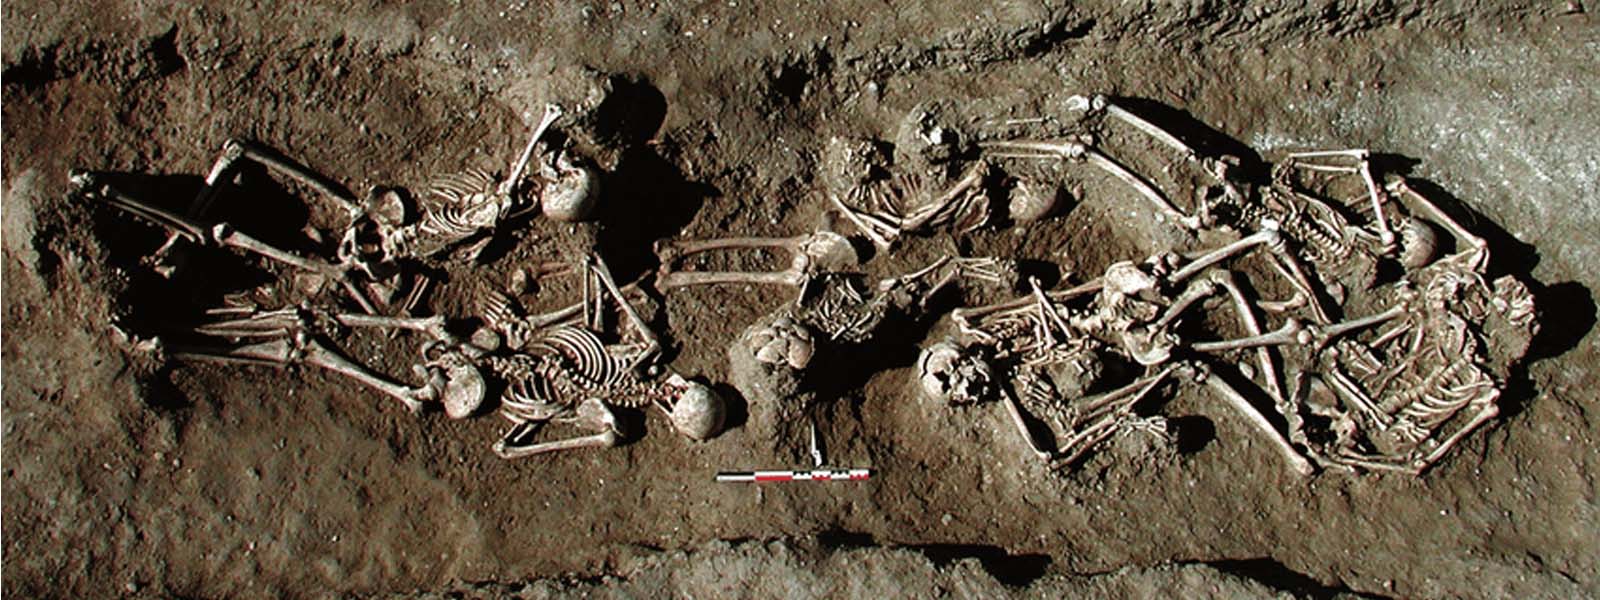 Skeletons from Mannar mass grave risen to 254 